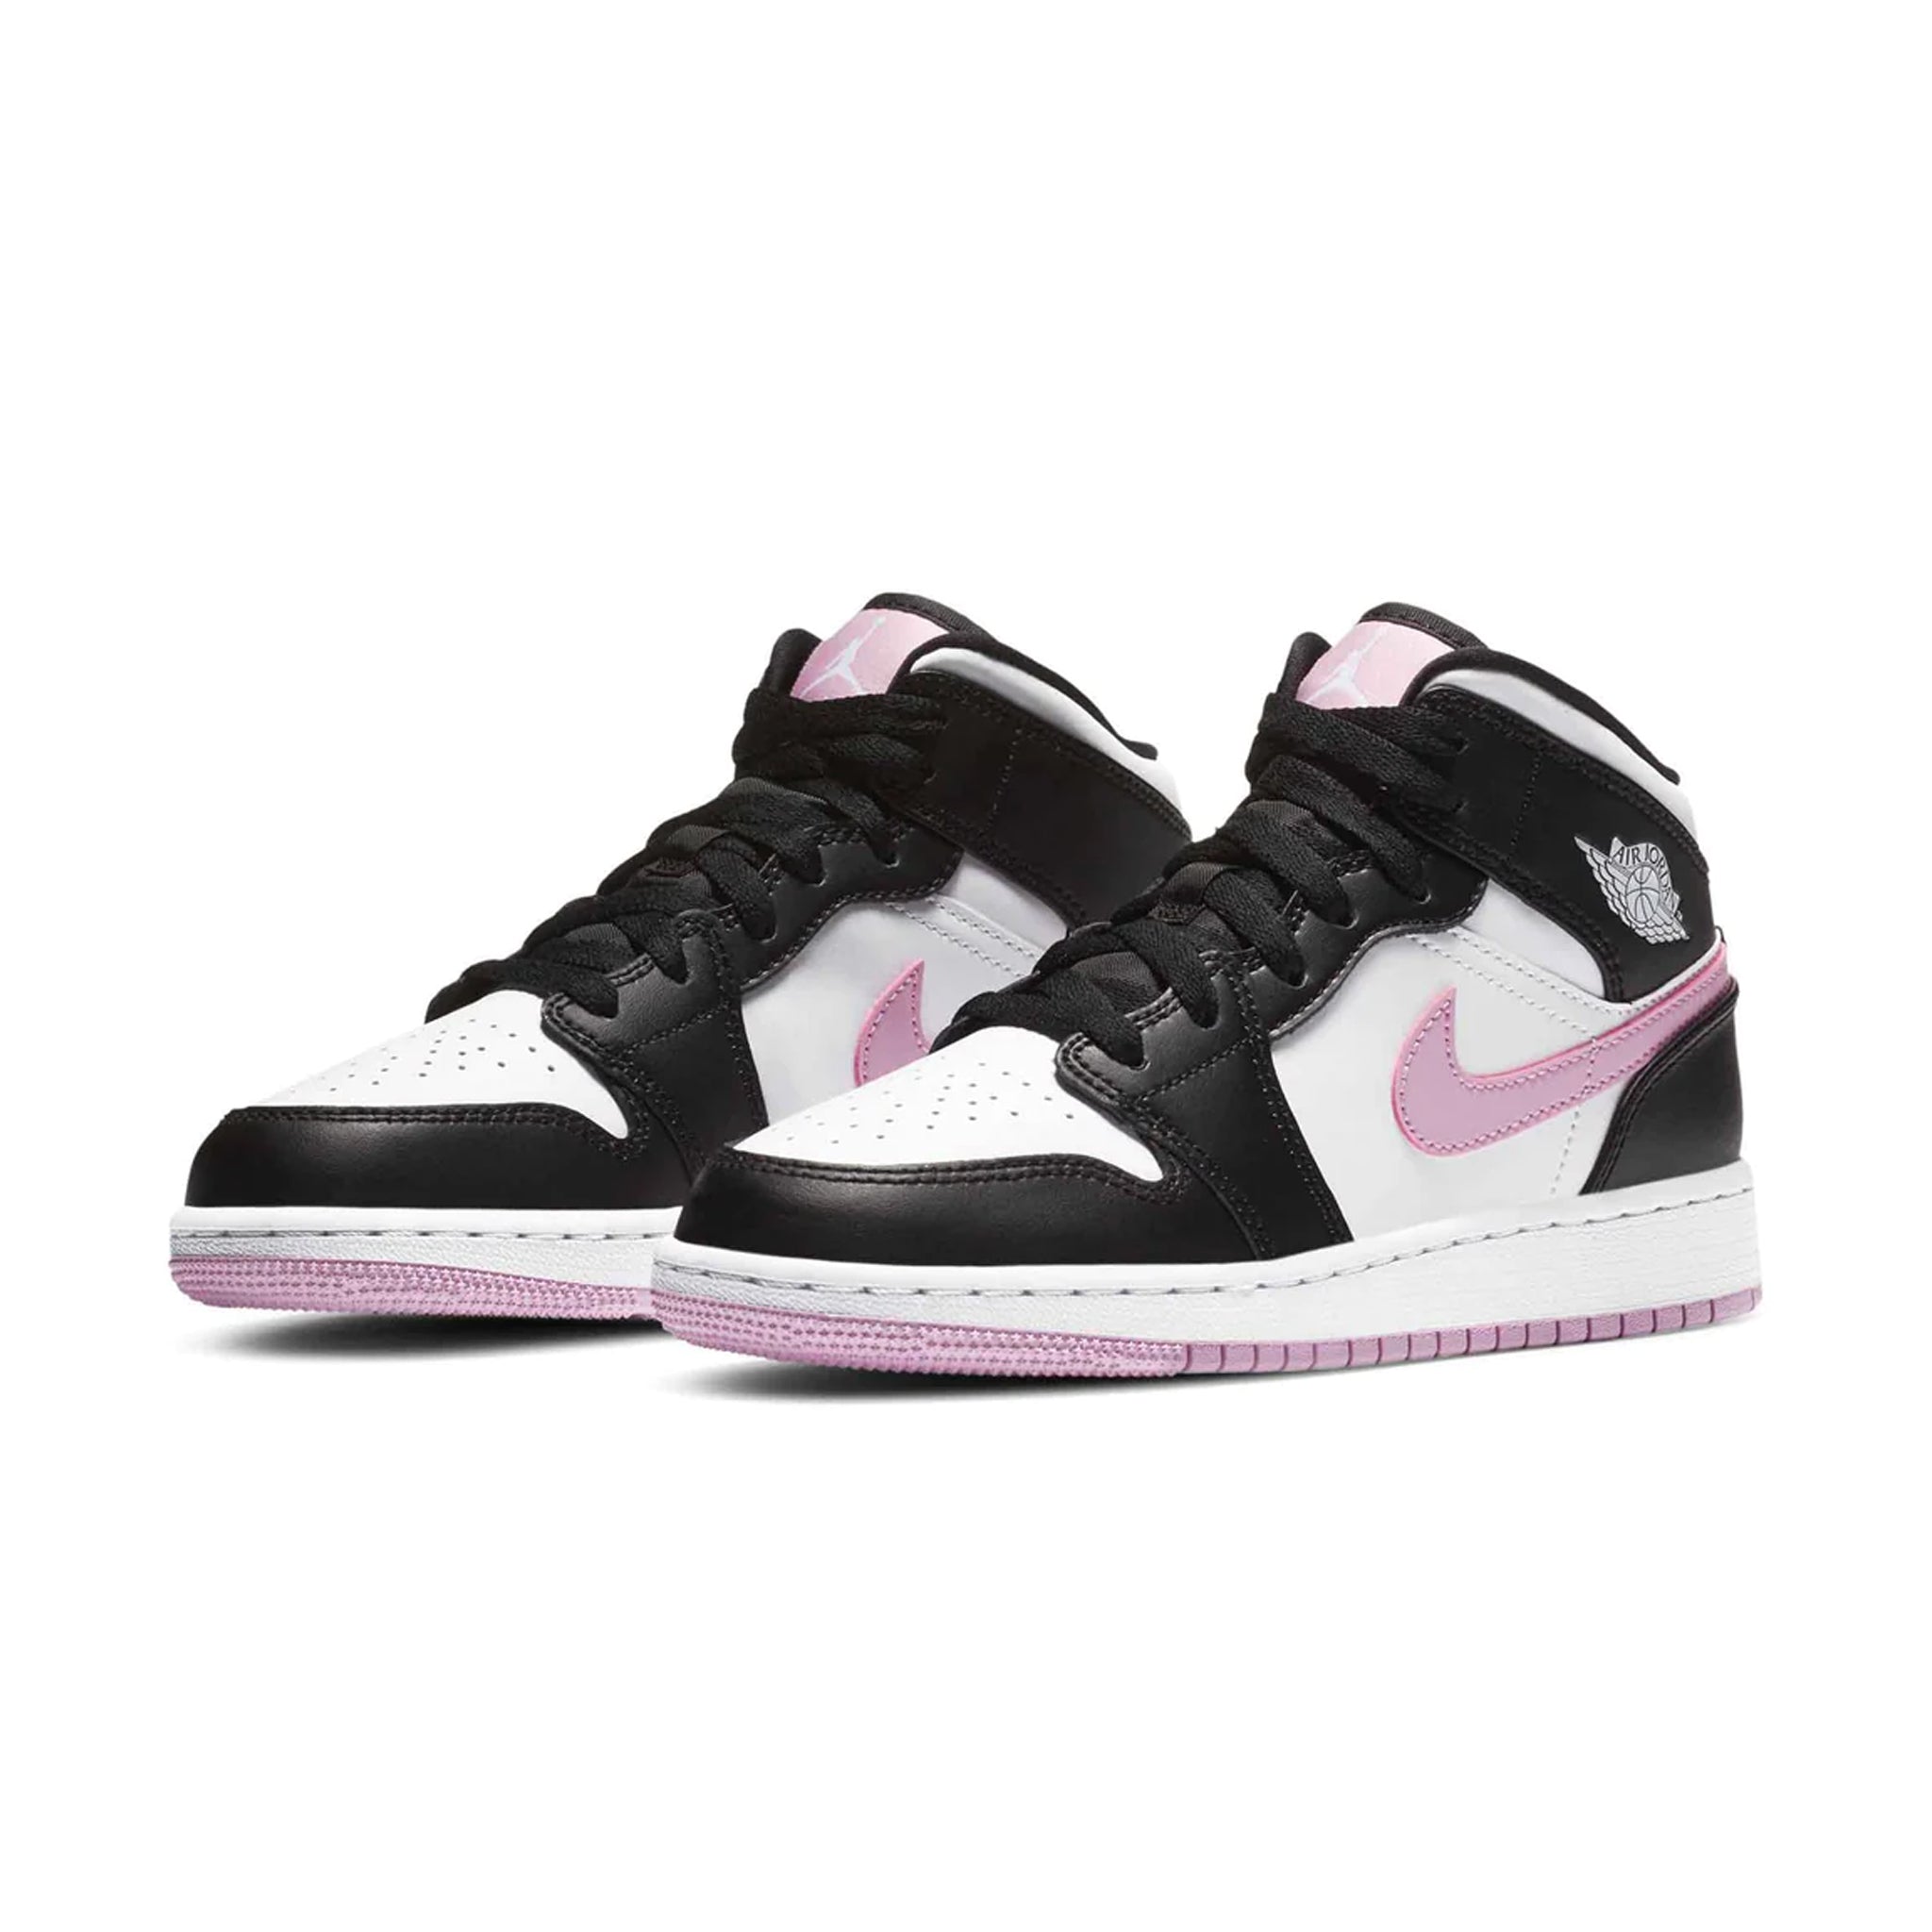 Front side view of Air Jordan 1 Mid White Arctic Pink (GS) 555112-103